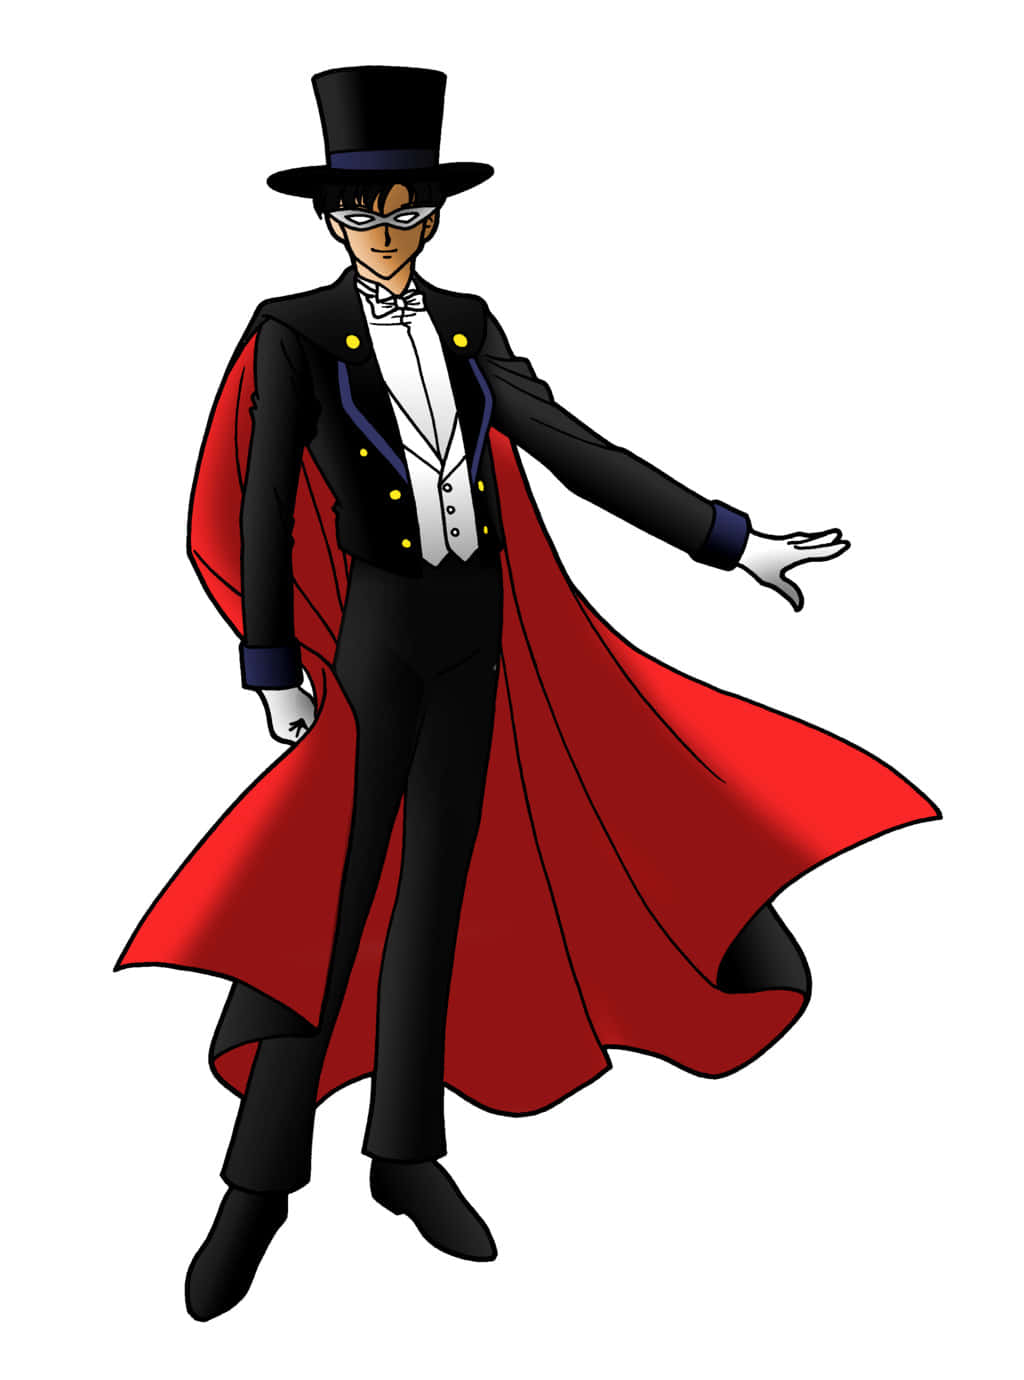 "The Hero of Love and Justice, Tuxedo Mask!" Wallpaper